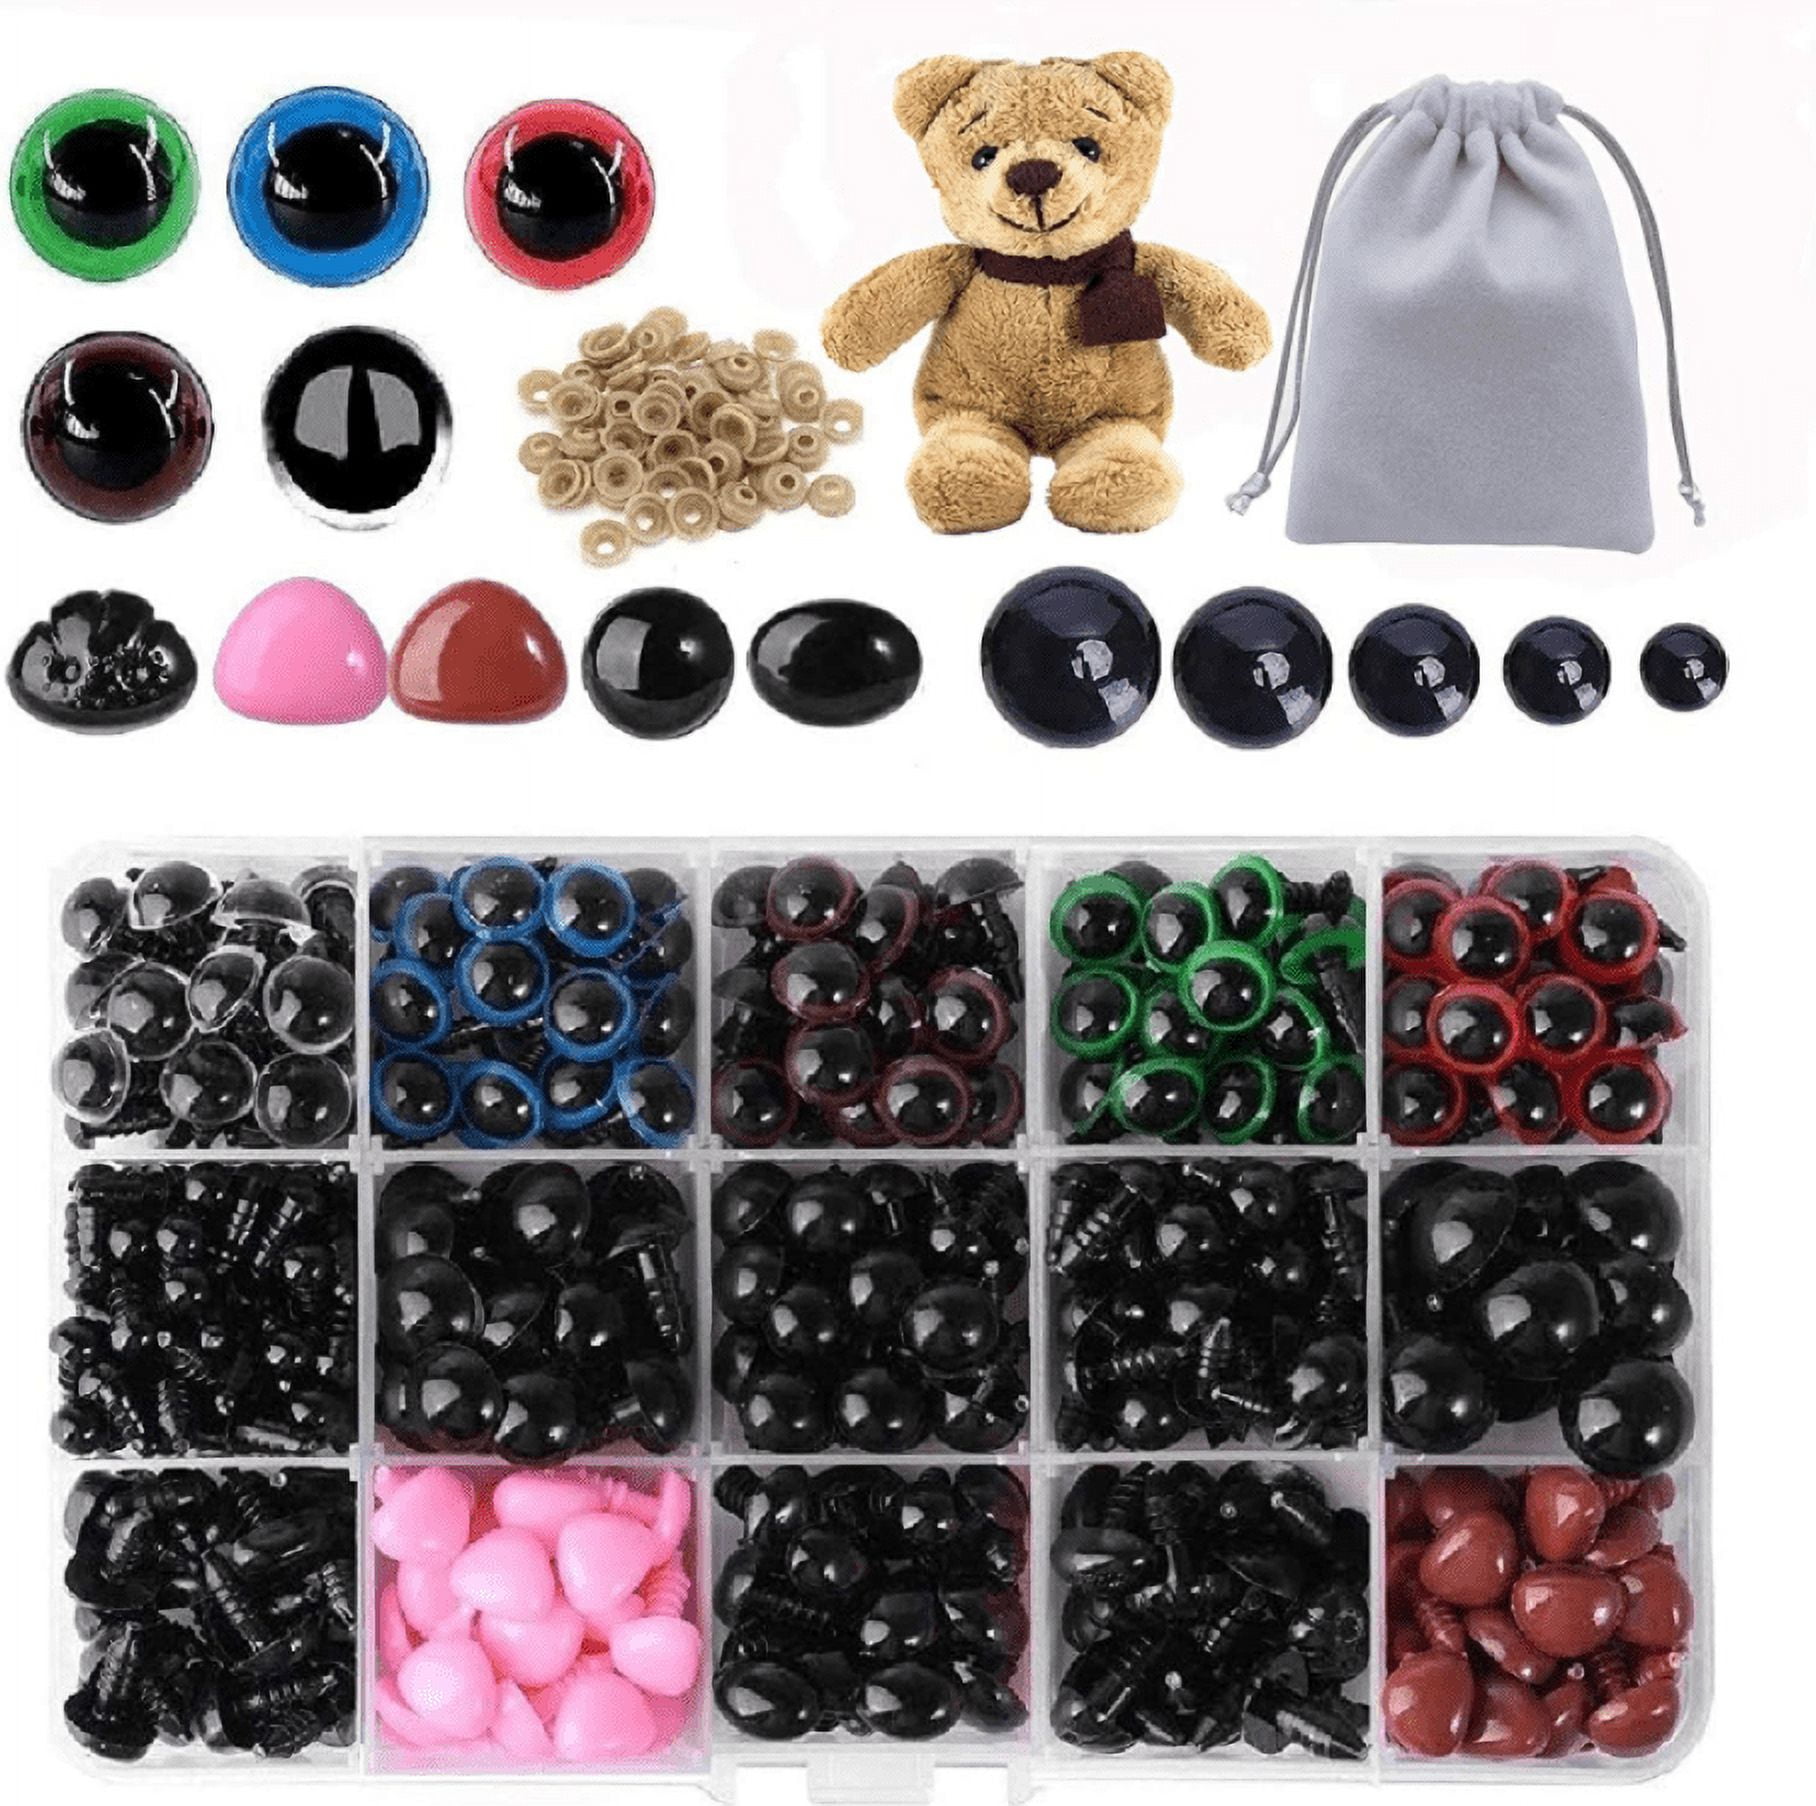 Safety Eyes and Noses, 560PCS Included Colourful Craft Doll Eyes